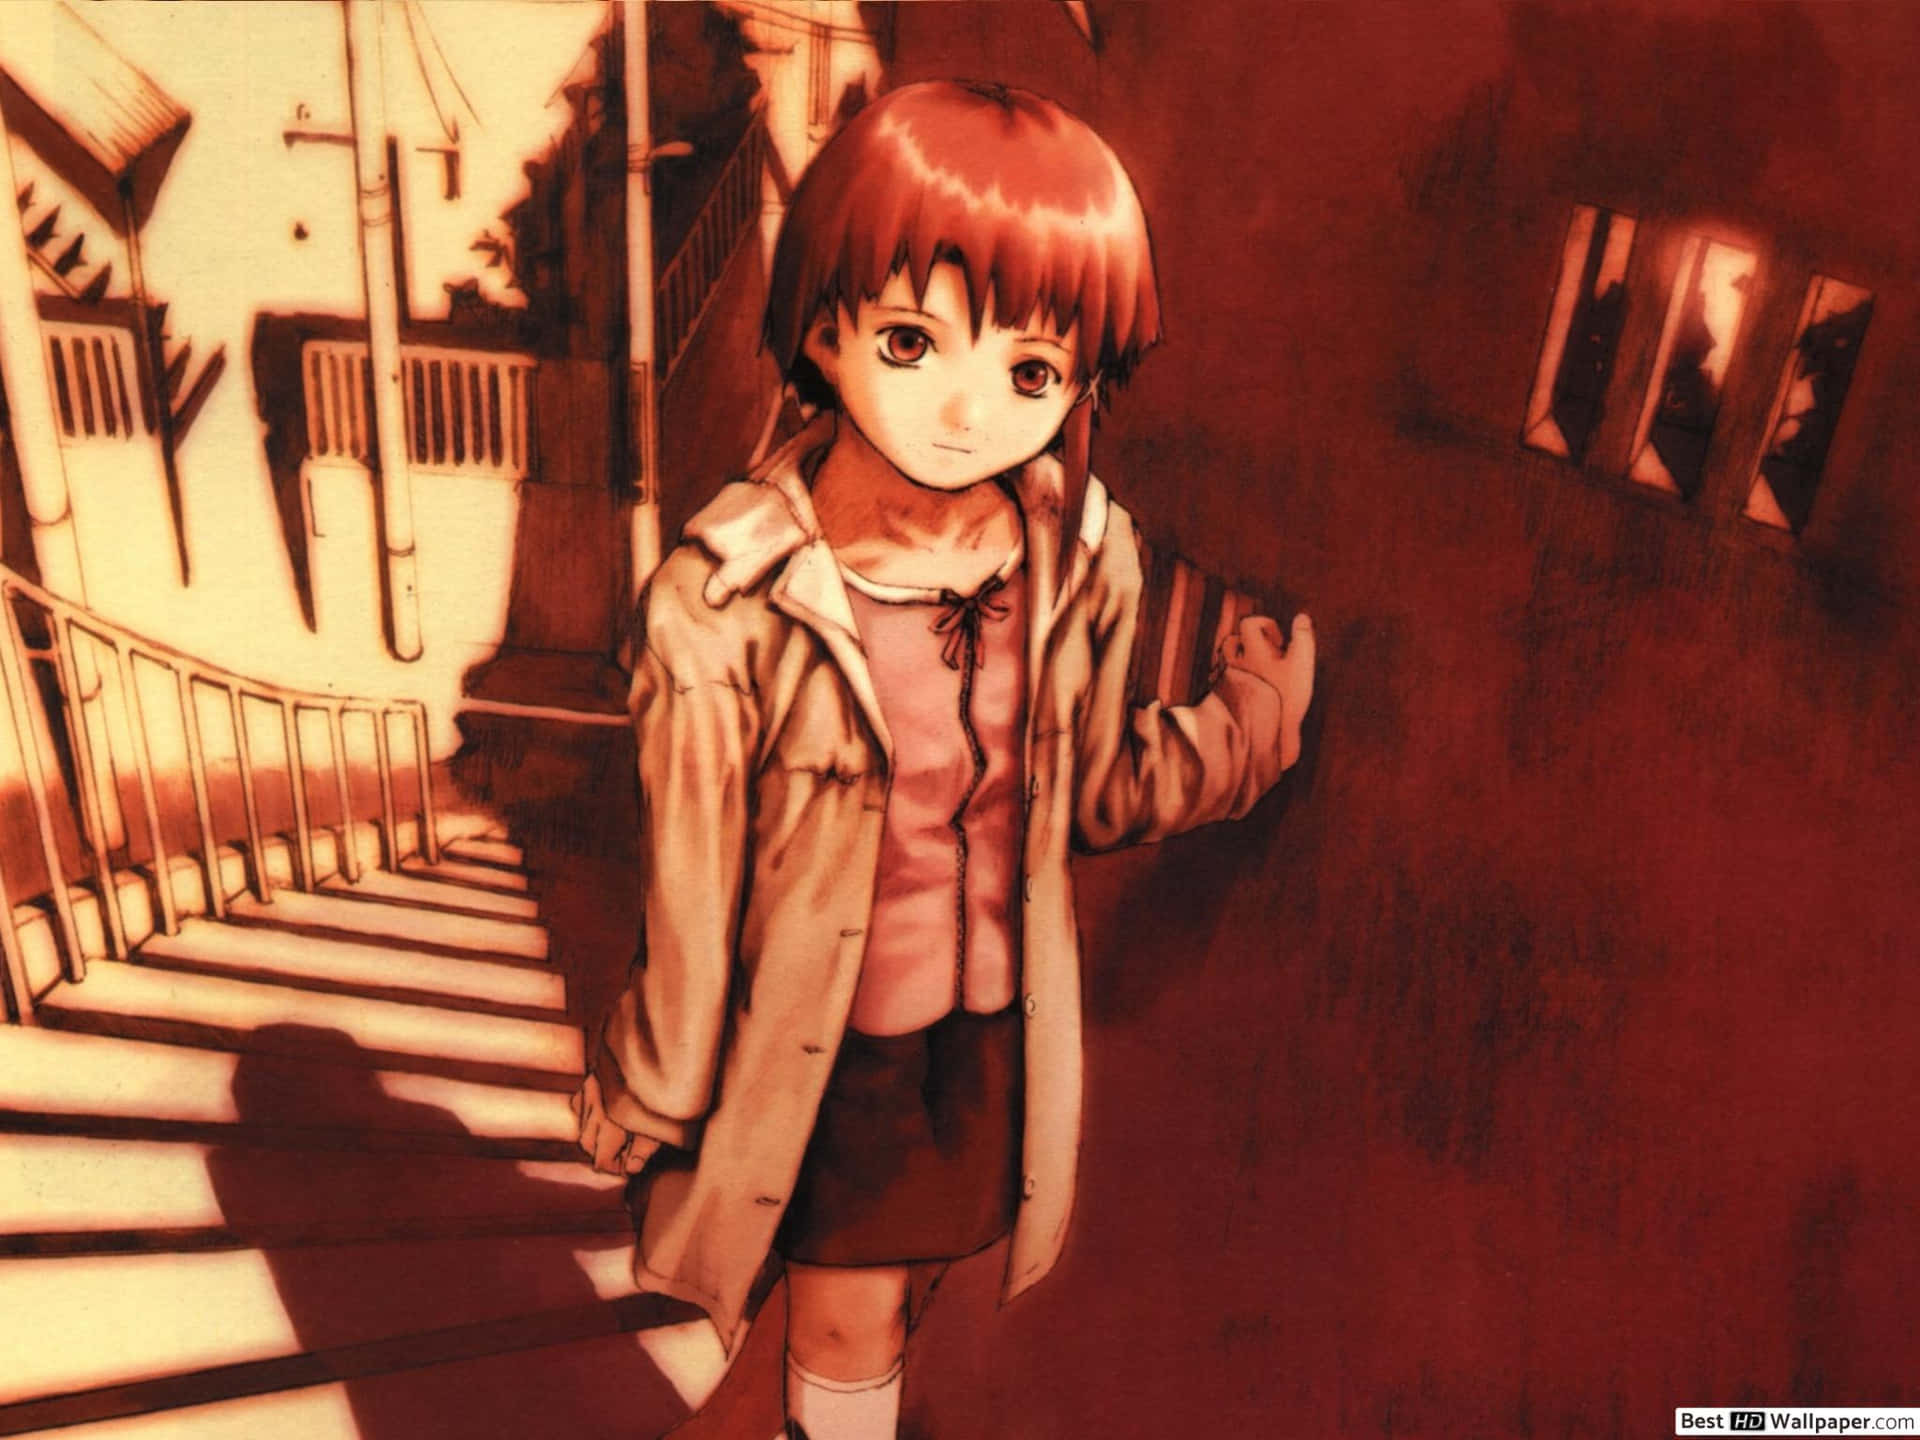 "Unlock the mysteries of Serial Experiments Lain" Wallpaper